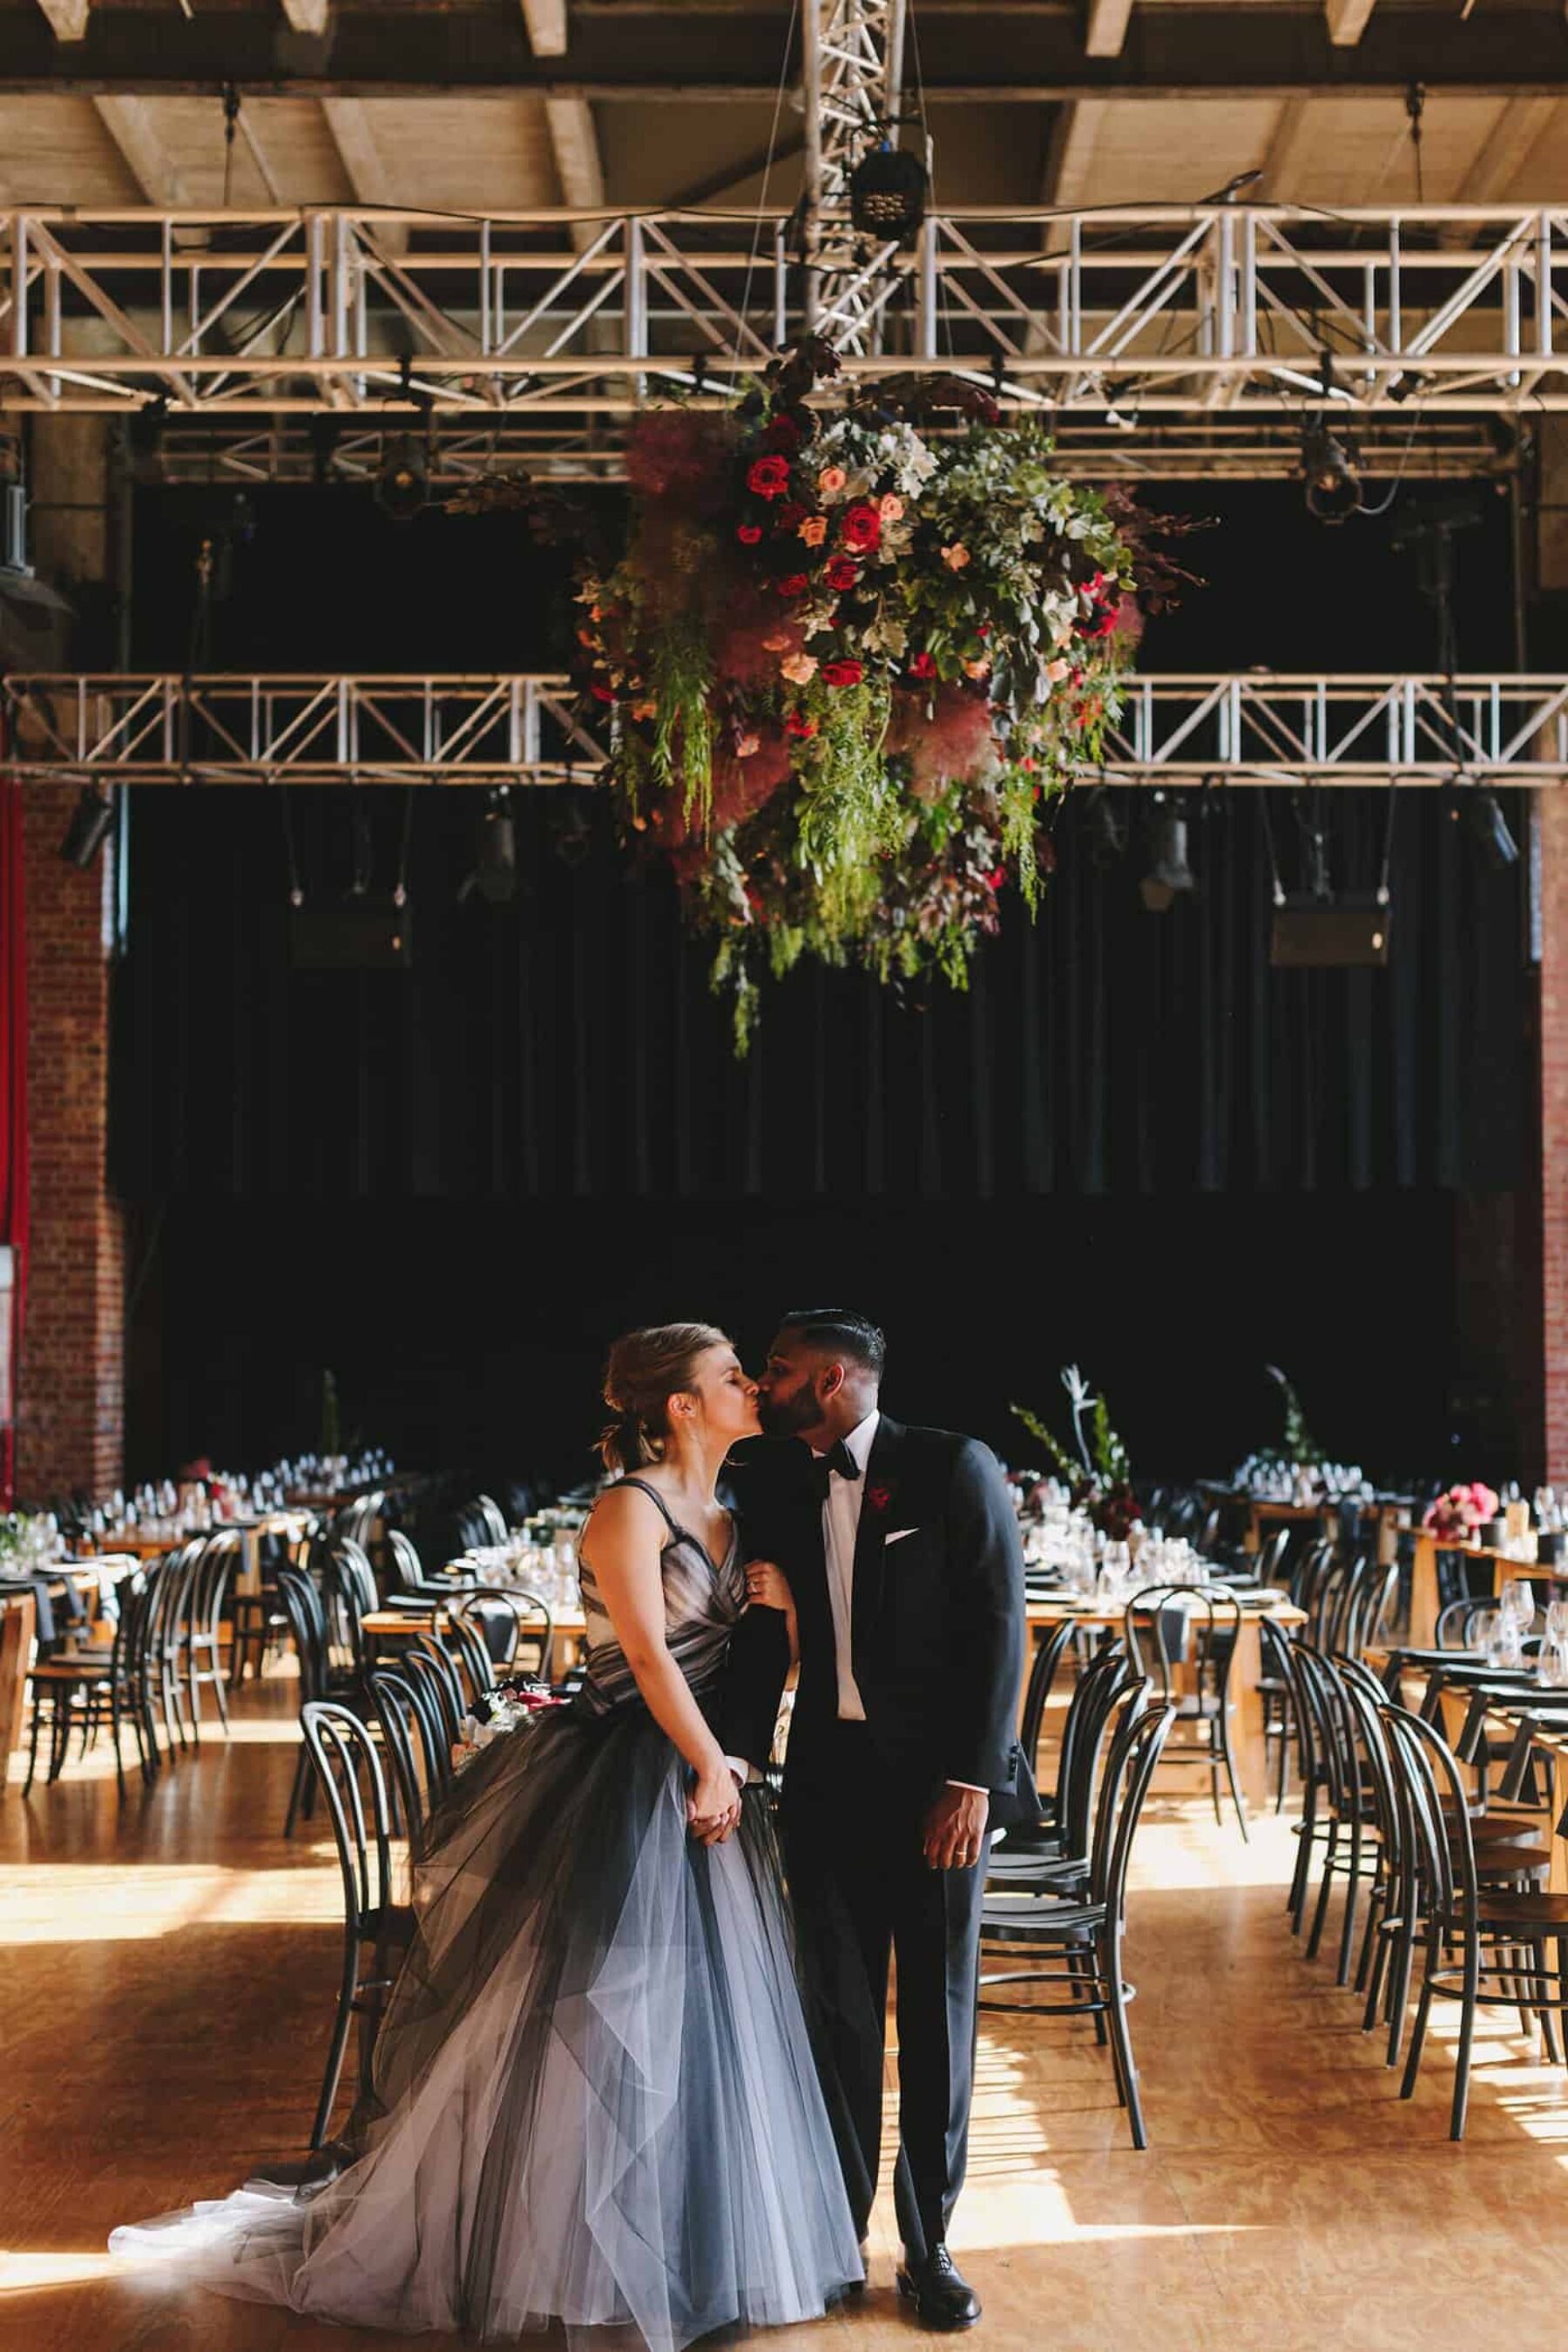 Newport Substation wedding Melbourne / photography by Jonathan Ong